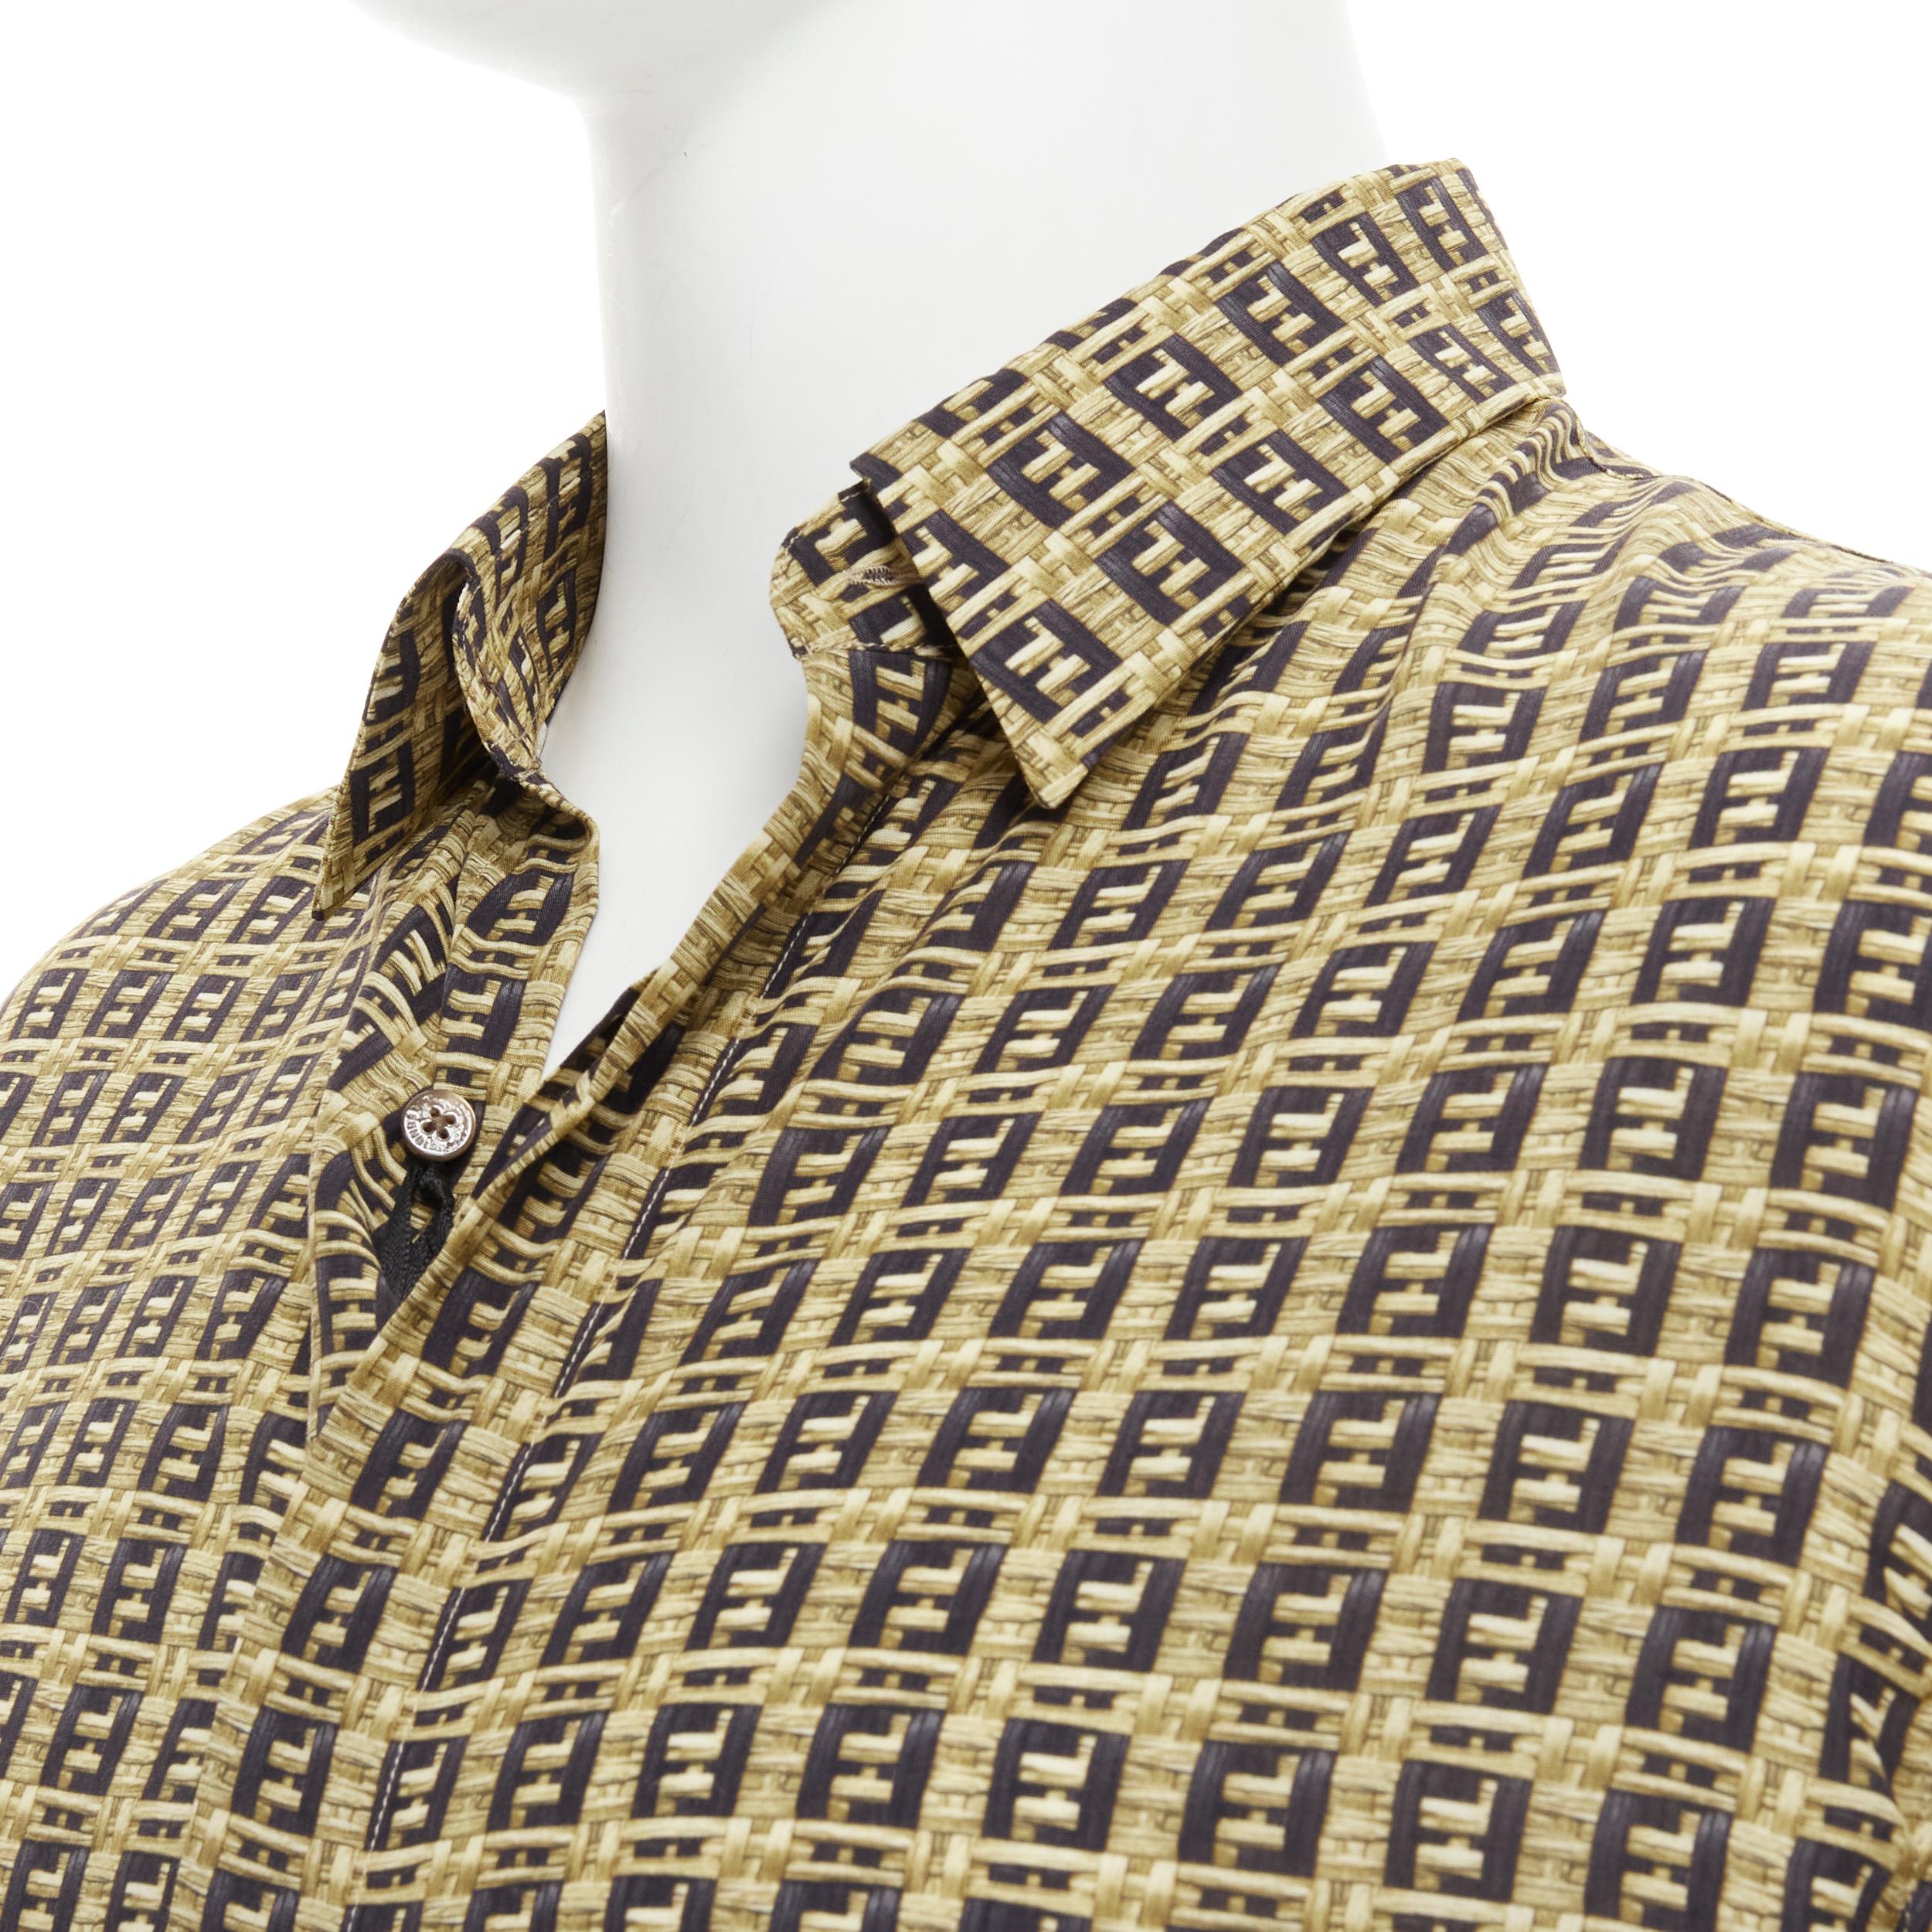 new FENDI Forever Bamboo FF Zucca interwoven print bowling summer shirt EU39 M 
Reference: TGAS/C00732 
Brand: Fendi 
Collection: Fendi Forever 
Material: Viscose 
Color: Brown 
Pattern: Abstract 
Closure: Button 
Estimated Retail Price: US $1060